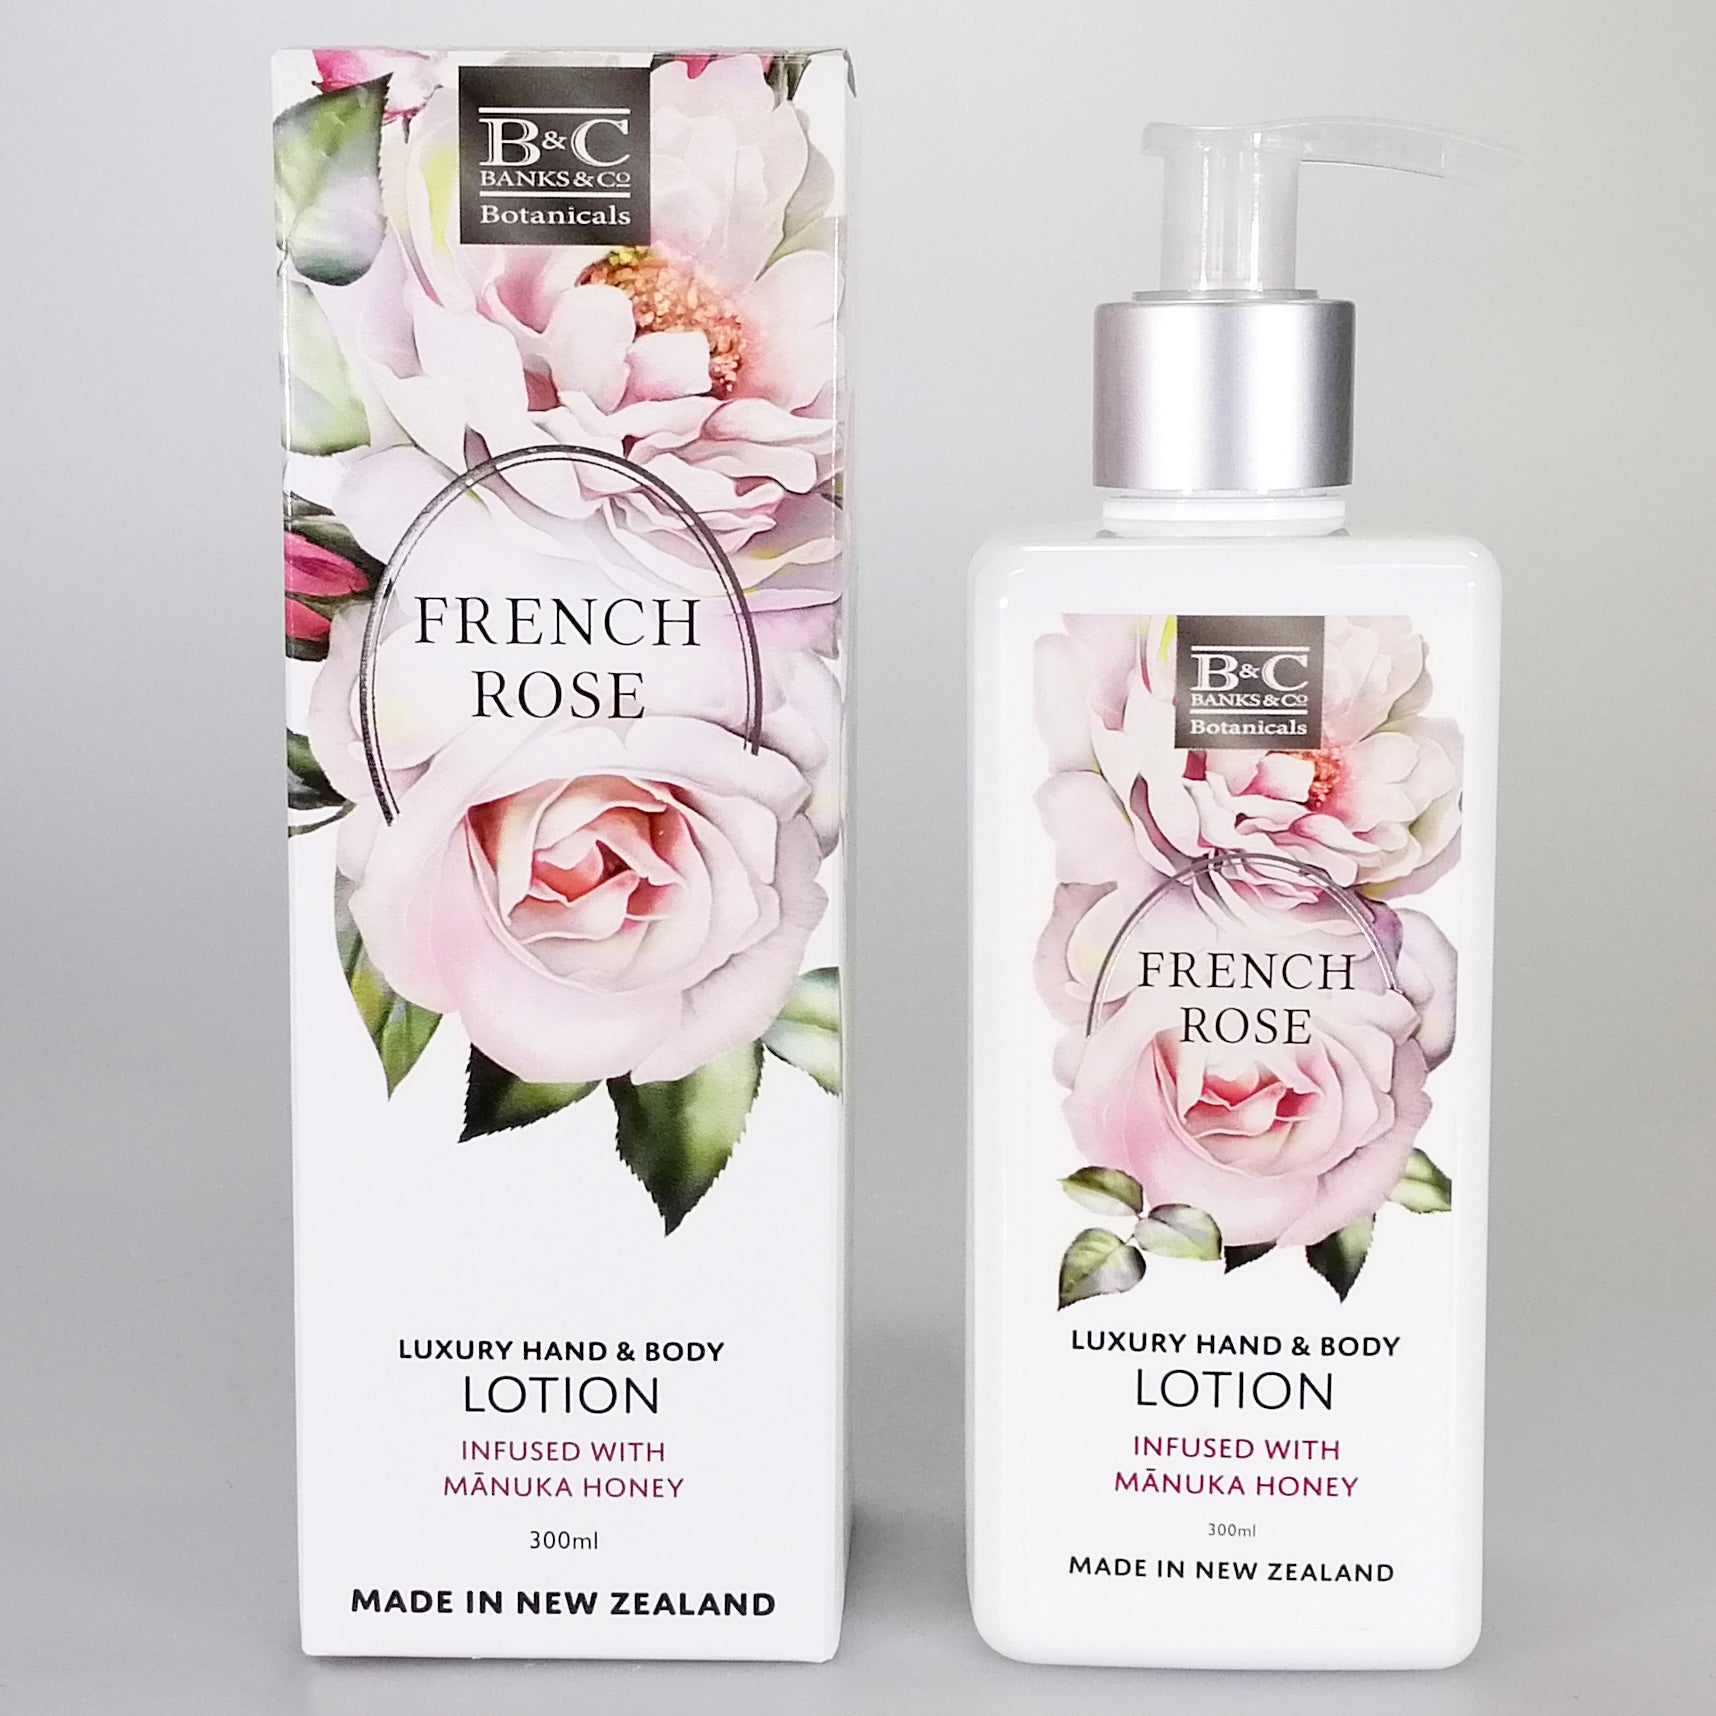 Banks & Co. French Rose - Luxury Hand & Body Lotion